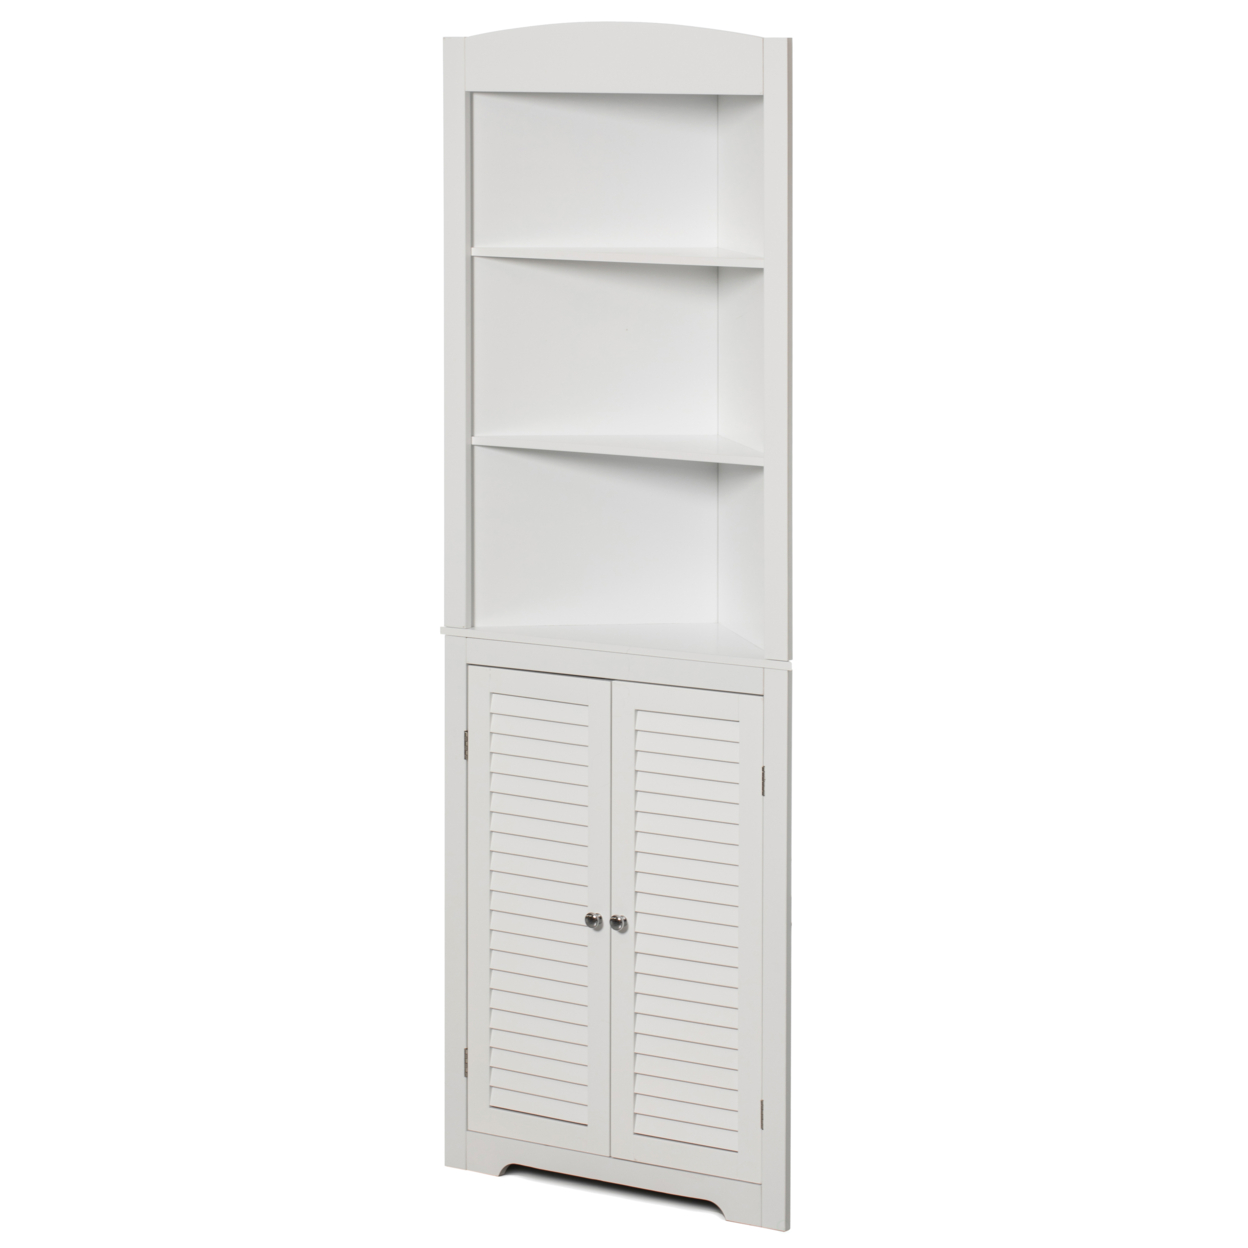 White Standing Storage Corner Cabinet Organizer with 3 Open Shelf and Double Shutter Doors